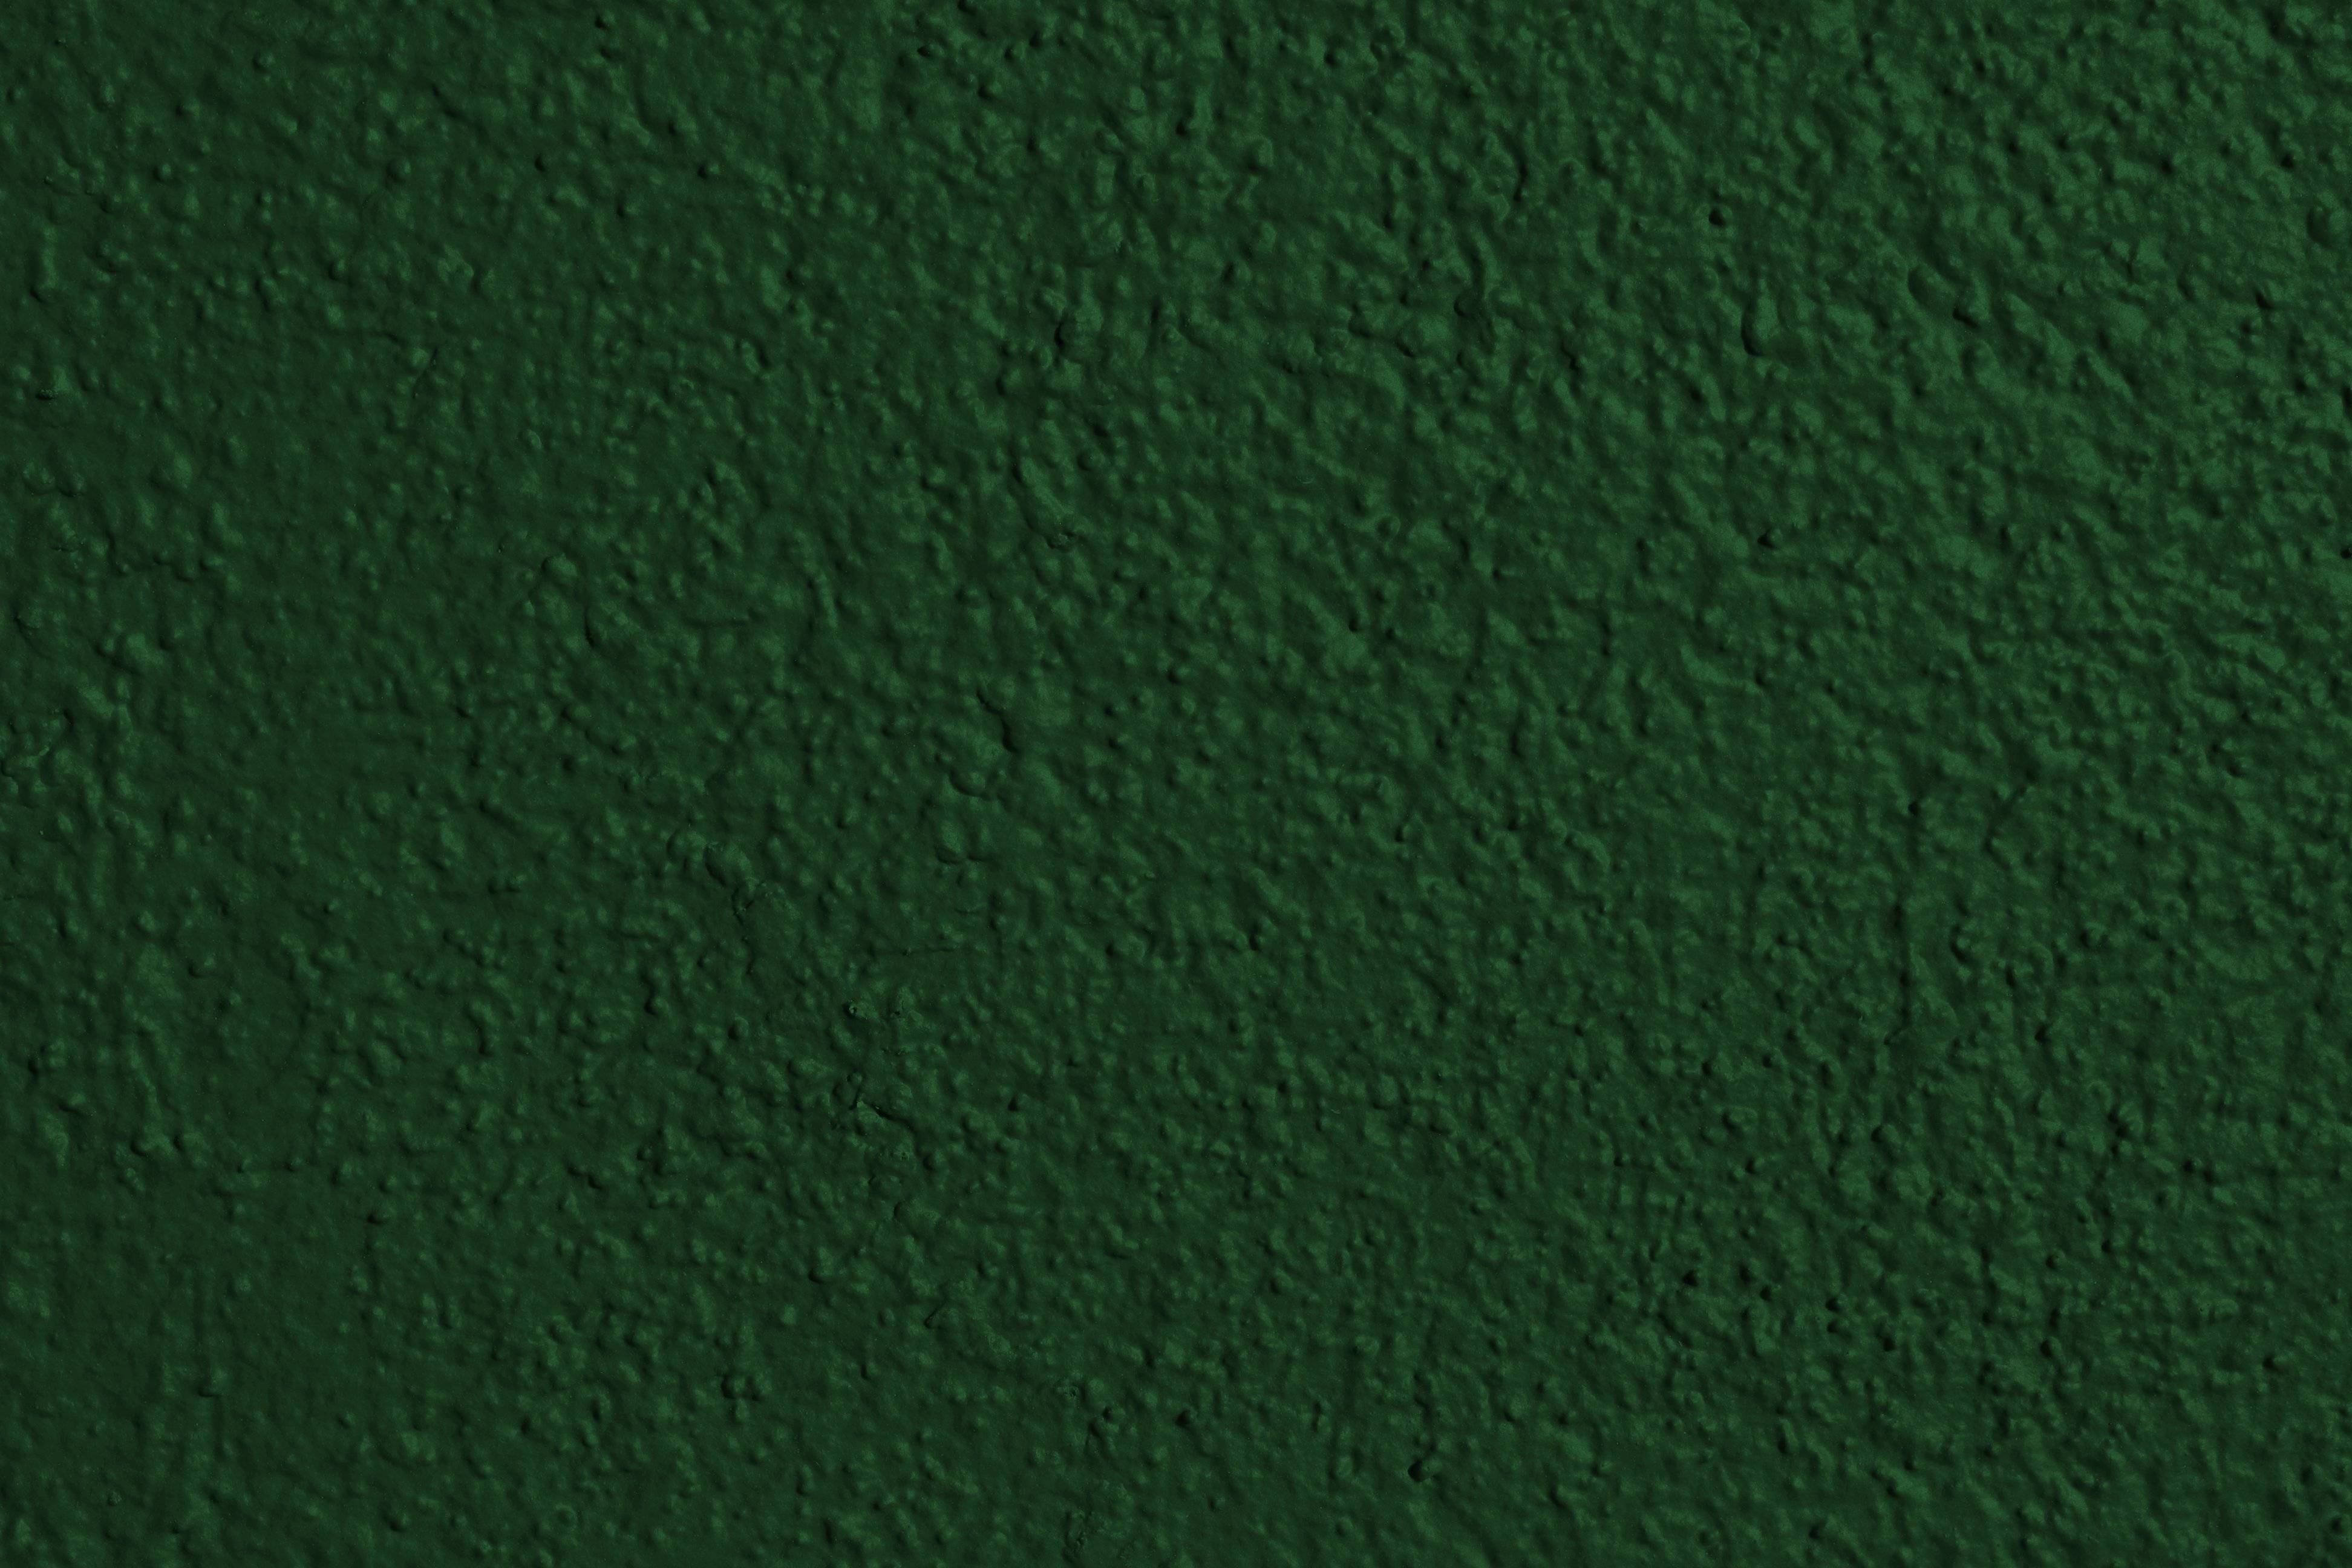 Forest Green Painted Wall Texture Picture. Free Photograph